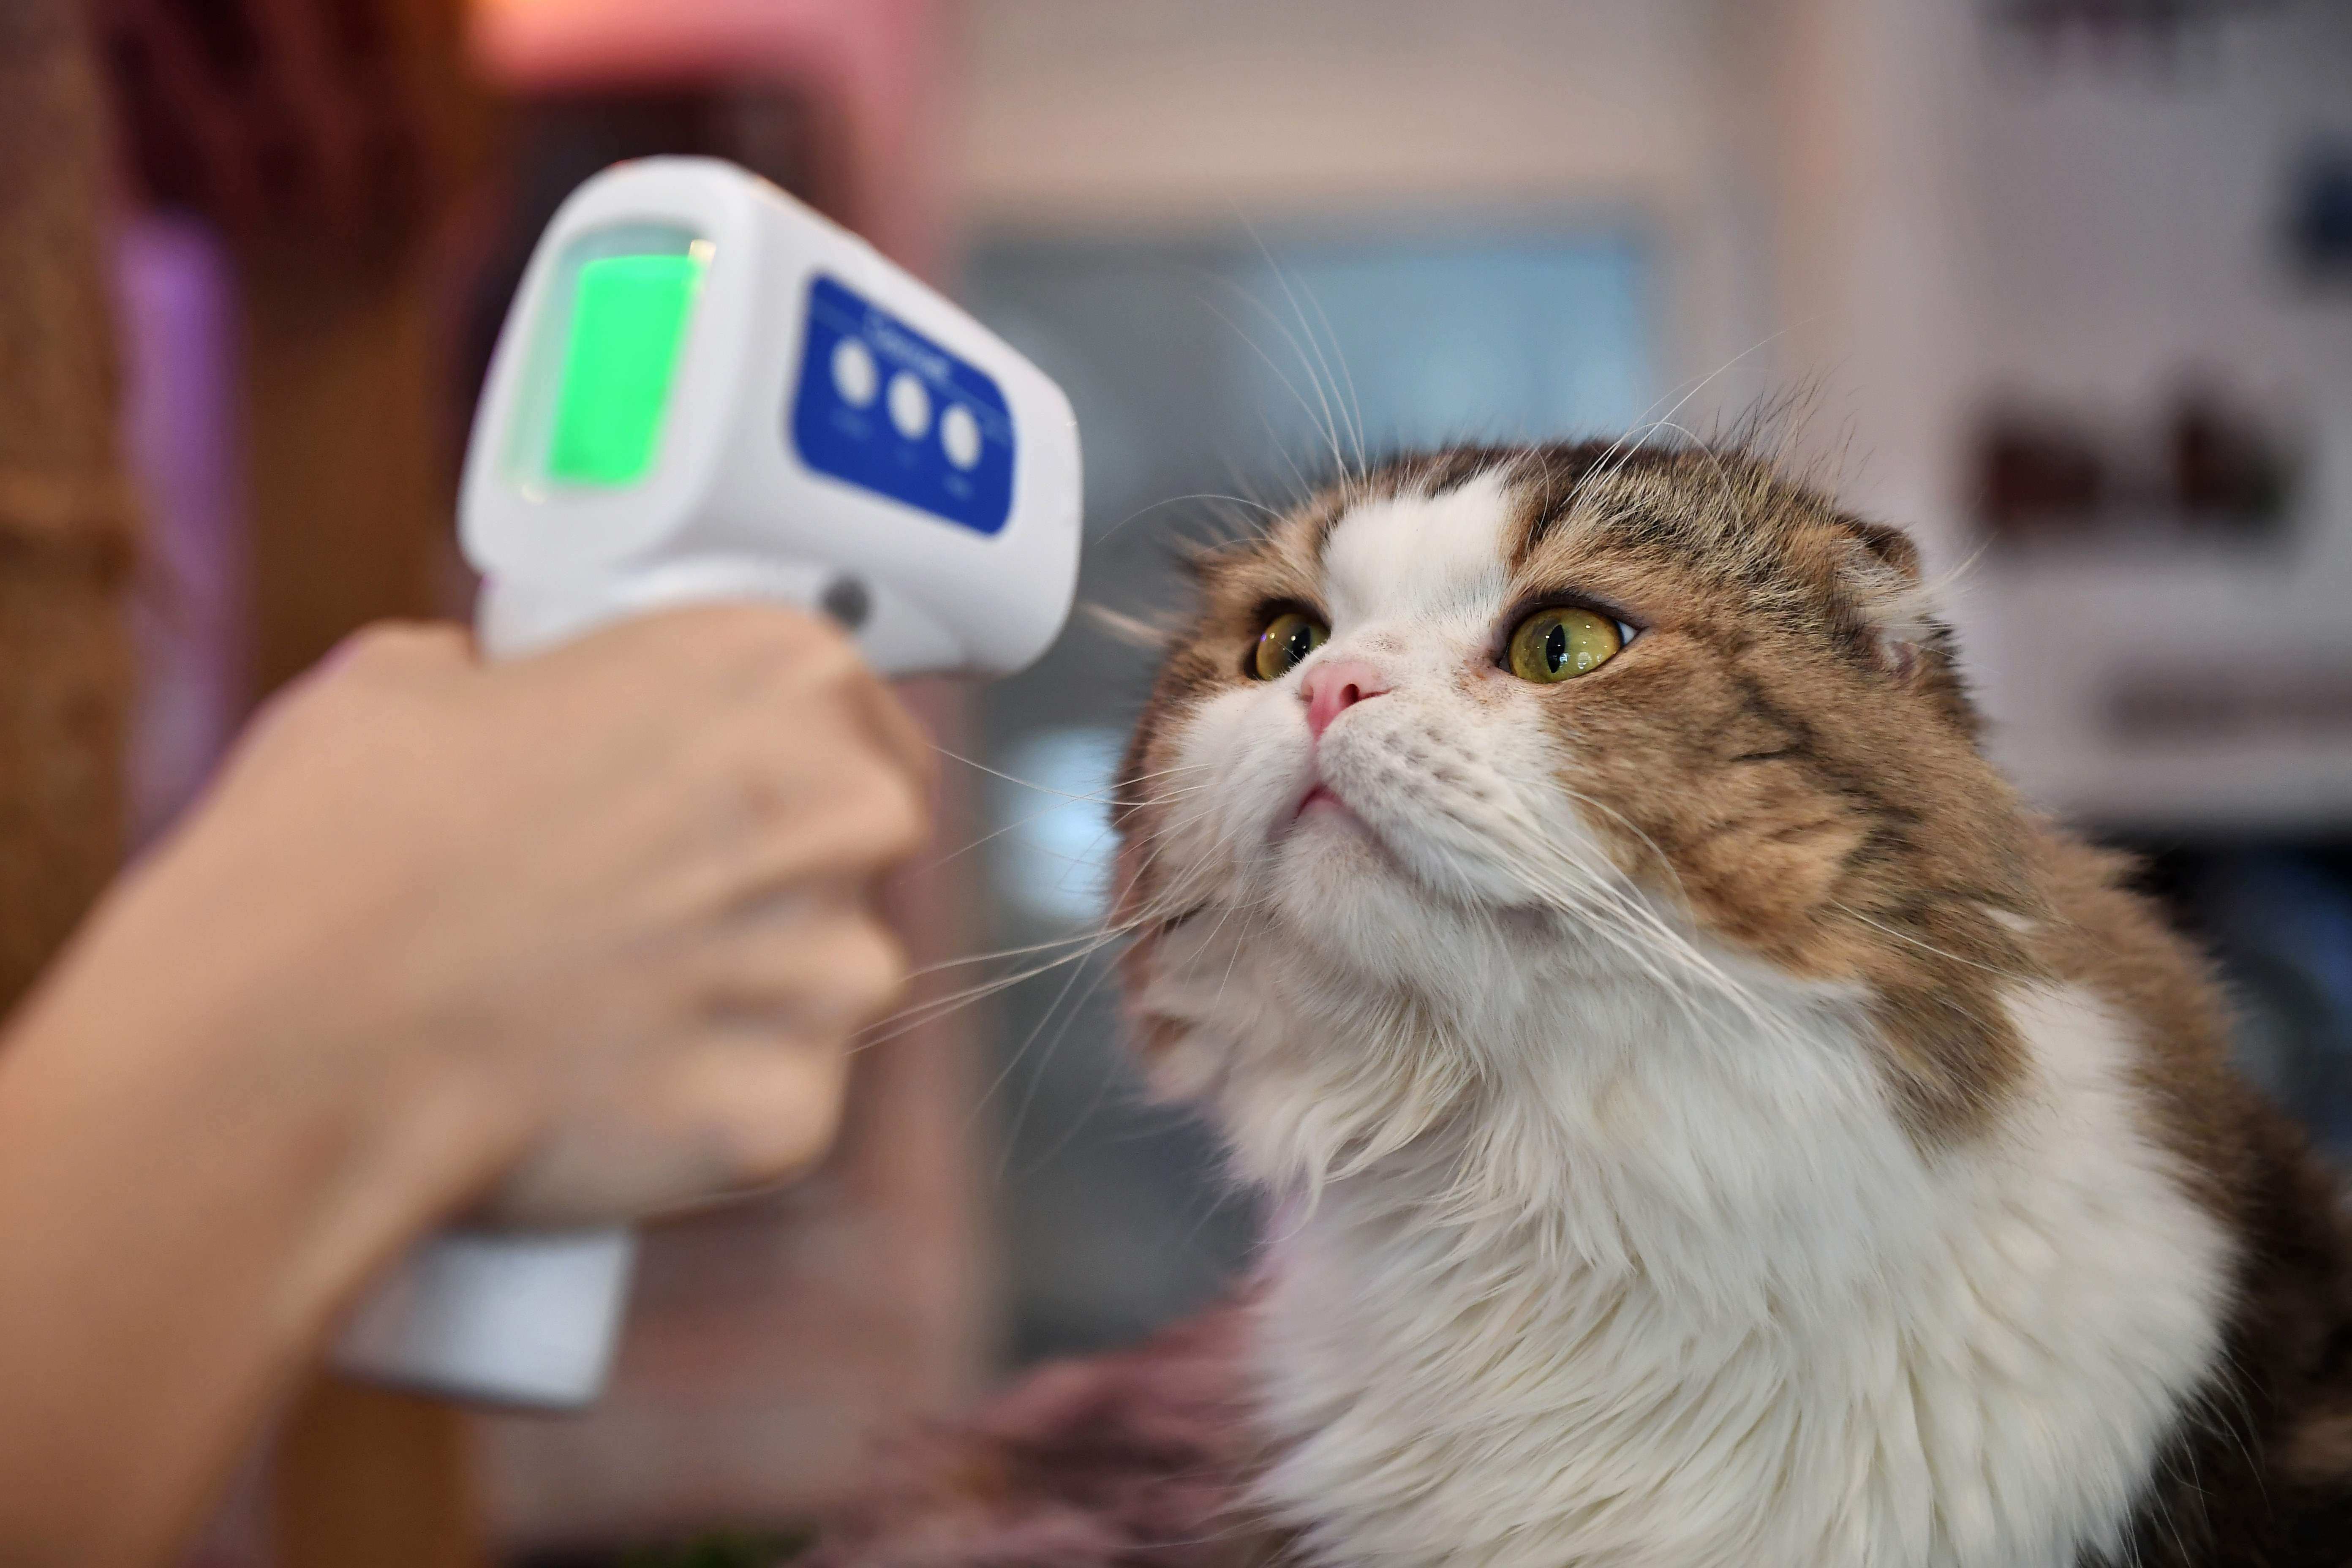 What You Need To Know About Feline Coronavirus Fcov Fip Biogal Labs